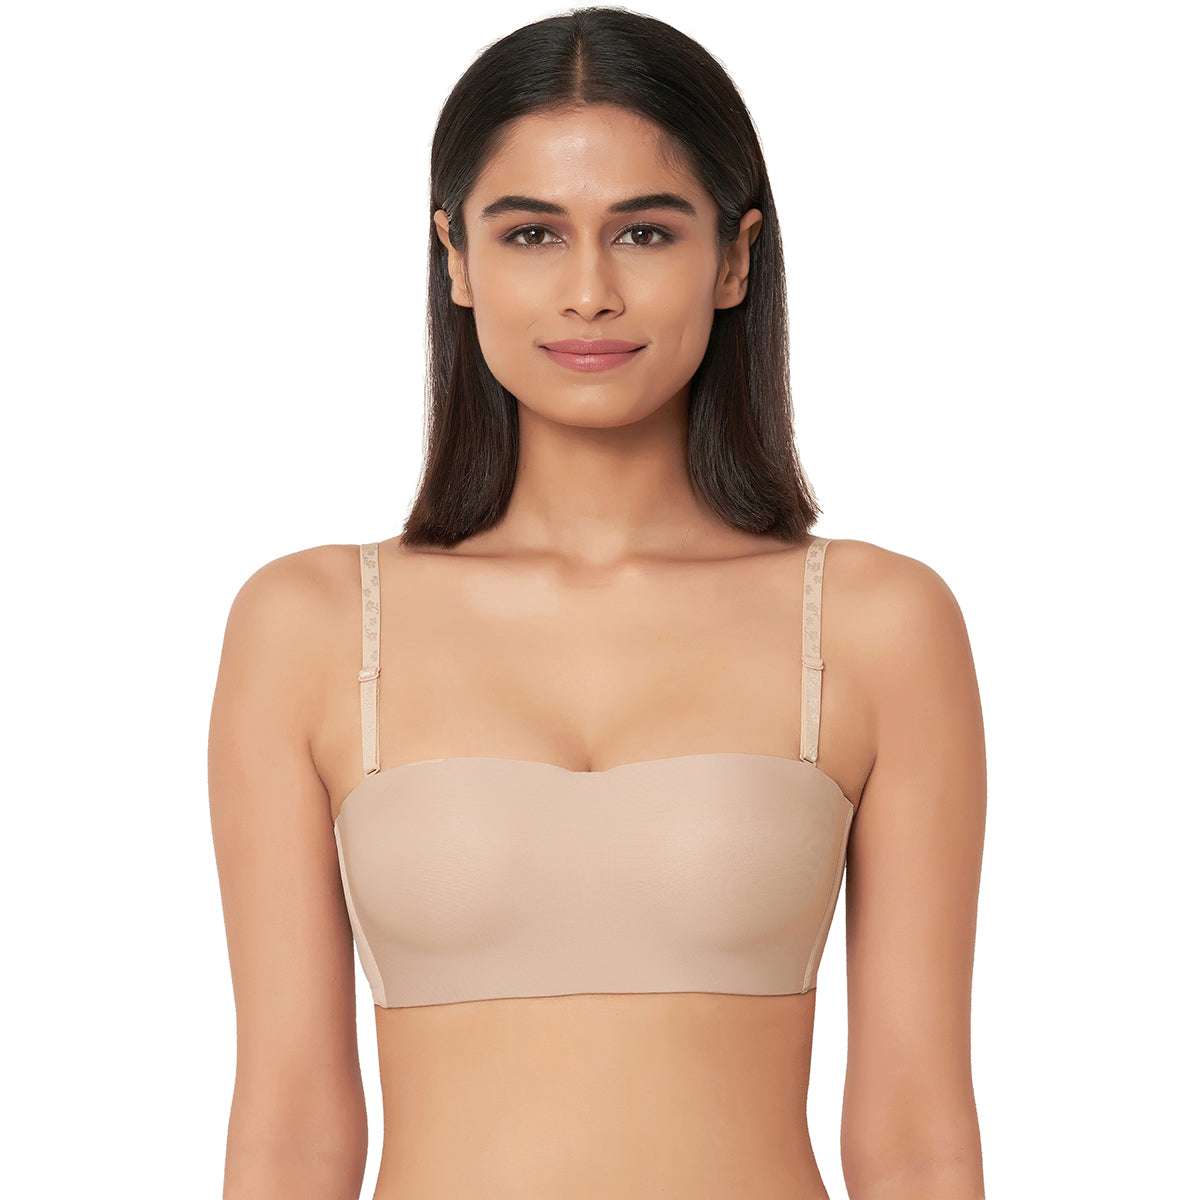 Wacoal Nylon, Elastane Basic Mold Seamless Women's Strapless Bra (36C, Nude)  in Bangalore at best price by Wacoal - Justdial